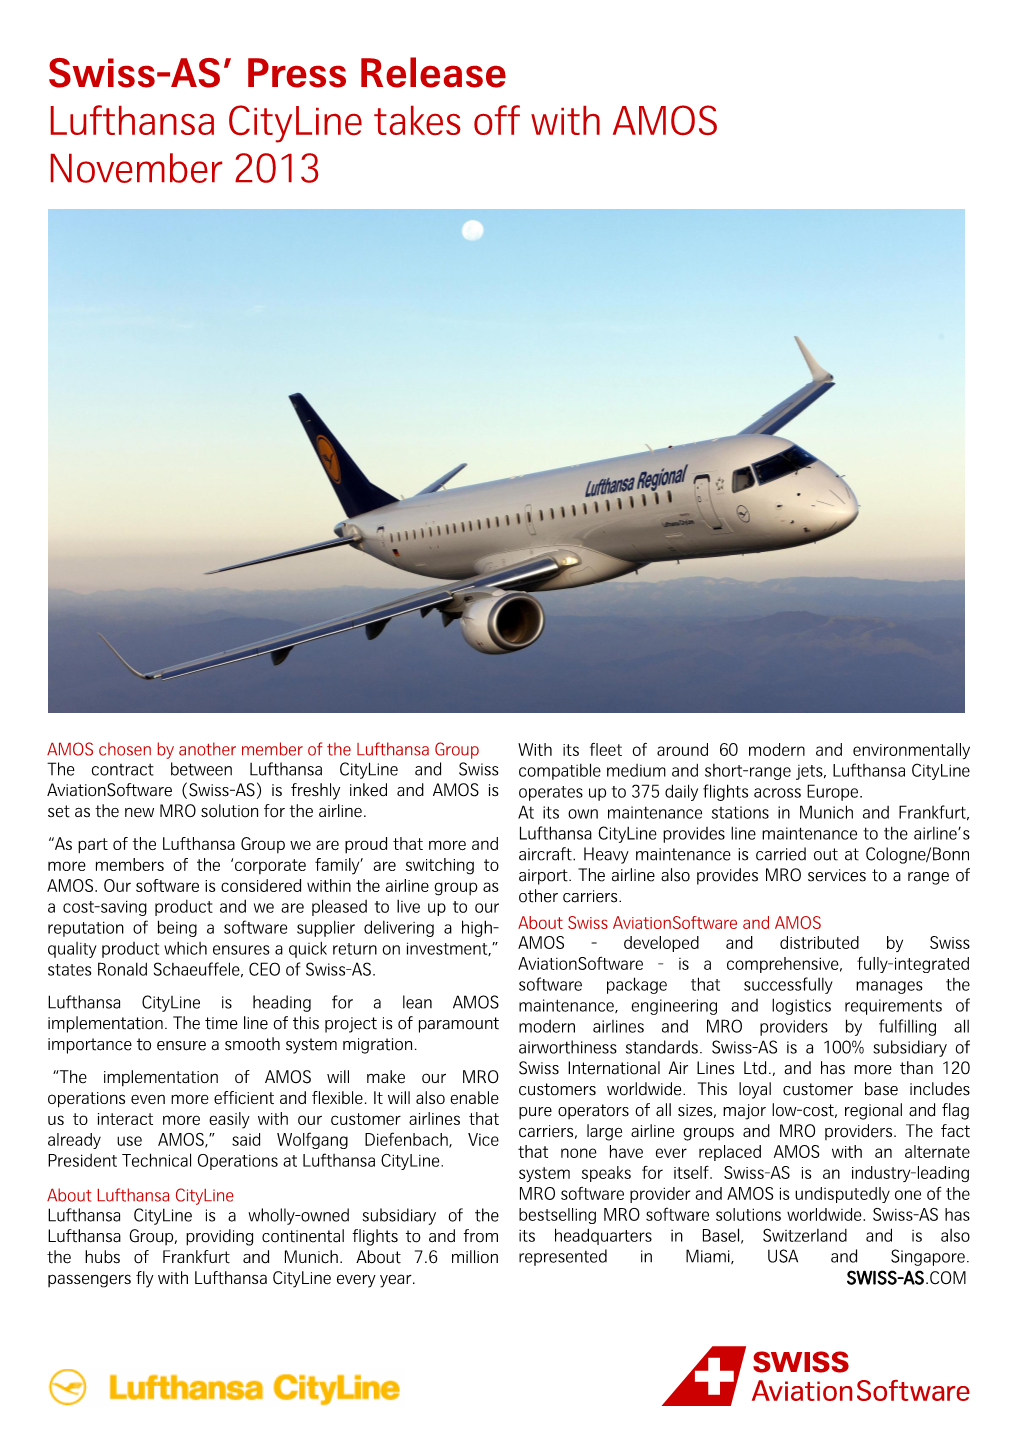 Swiss-AS' Press Release Lufthansa Cityline Takes Off with AMOS